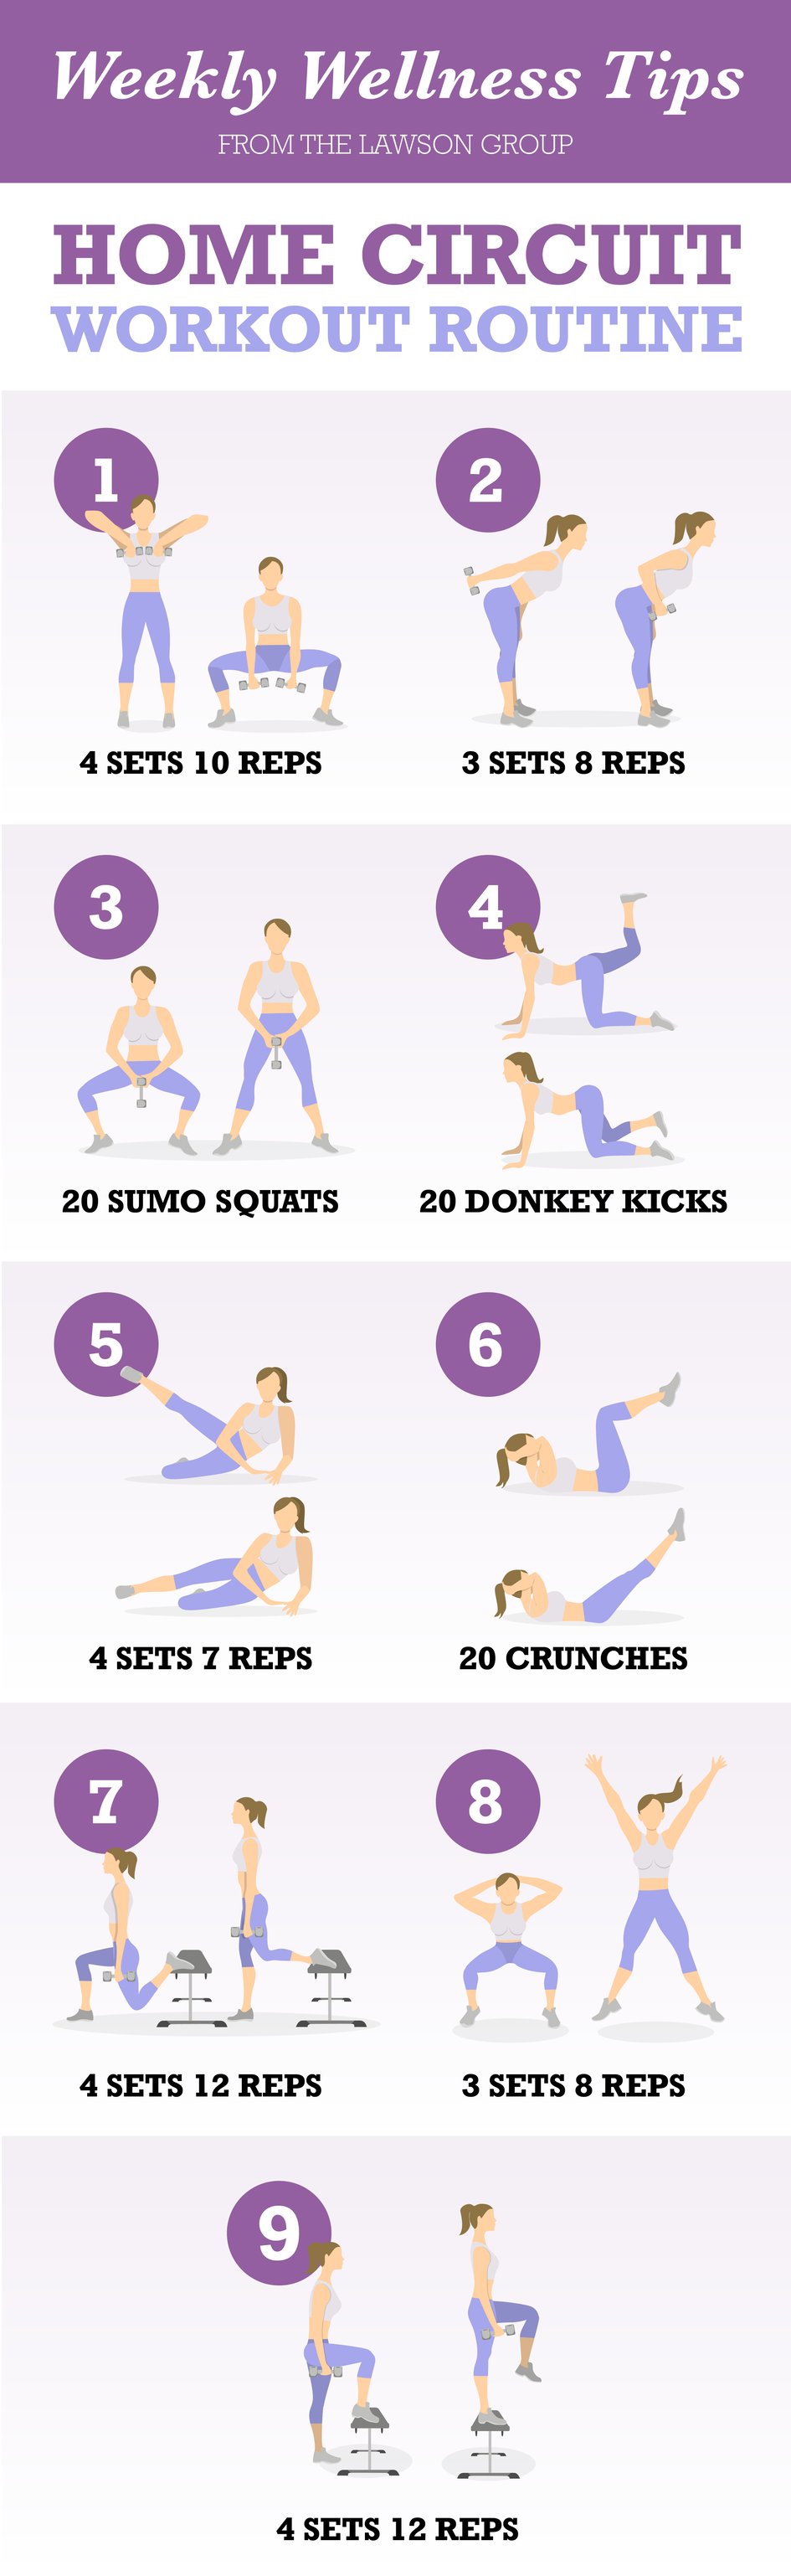 TLG22005 Wellness Tips Home Circuit Workout Routine Infographic-1080px-01